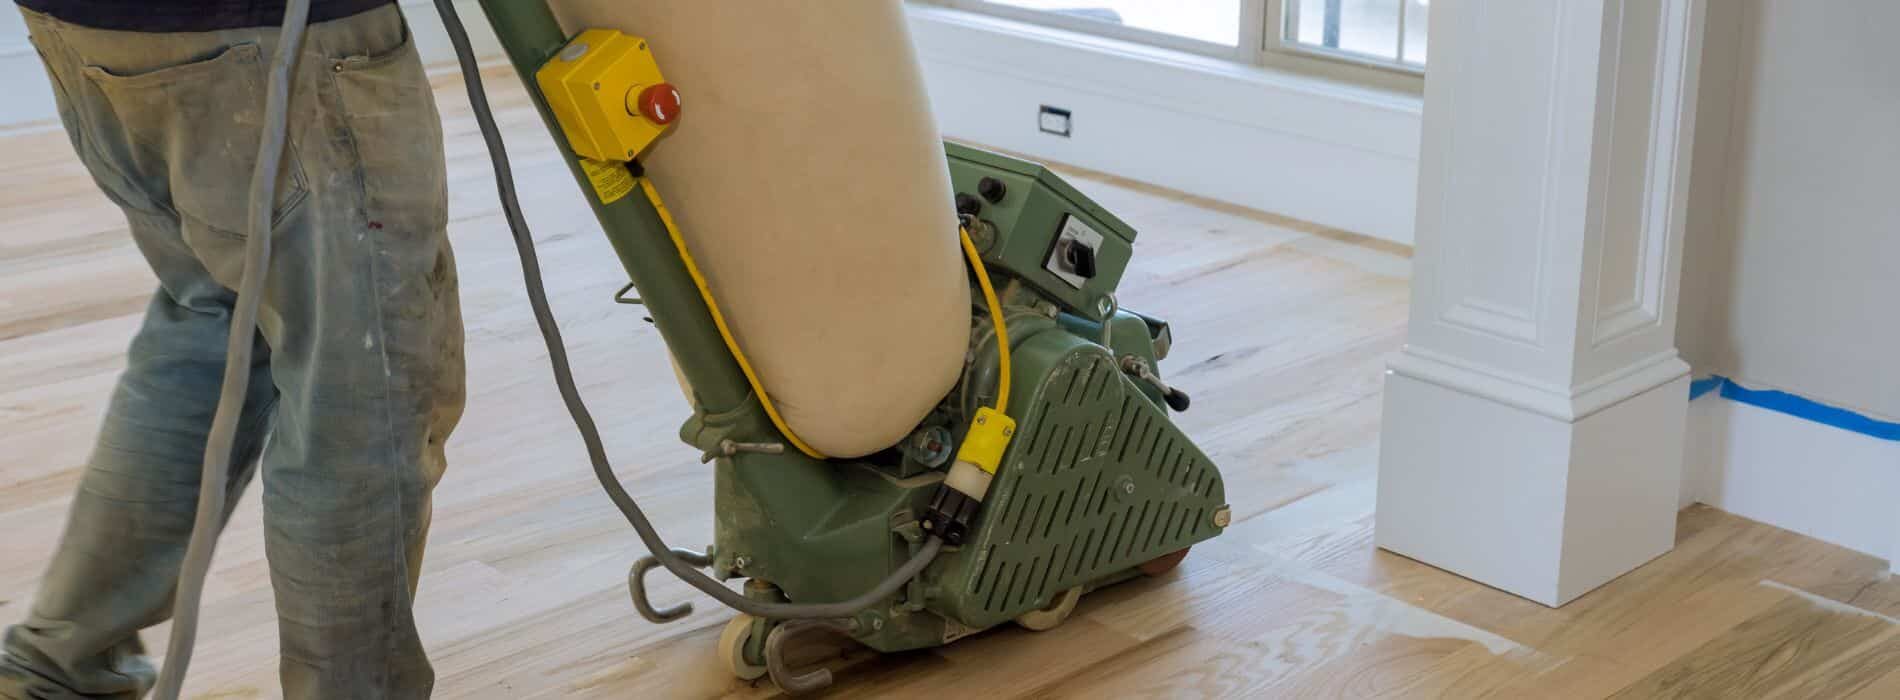 A professional Mr Sander® in Homerton utilizing the powerful Bona Scorpion drum sander (200mm, 1.5kW, 240V, 50Hz) equipped with a highly efficient HEPA-filtered dust extraction system. This combination ensures effective sanding while maintaining a pristine, dust-free environment for a flawless finish.